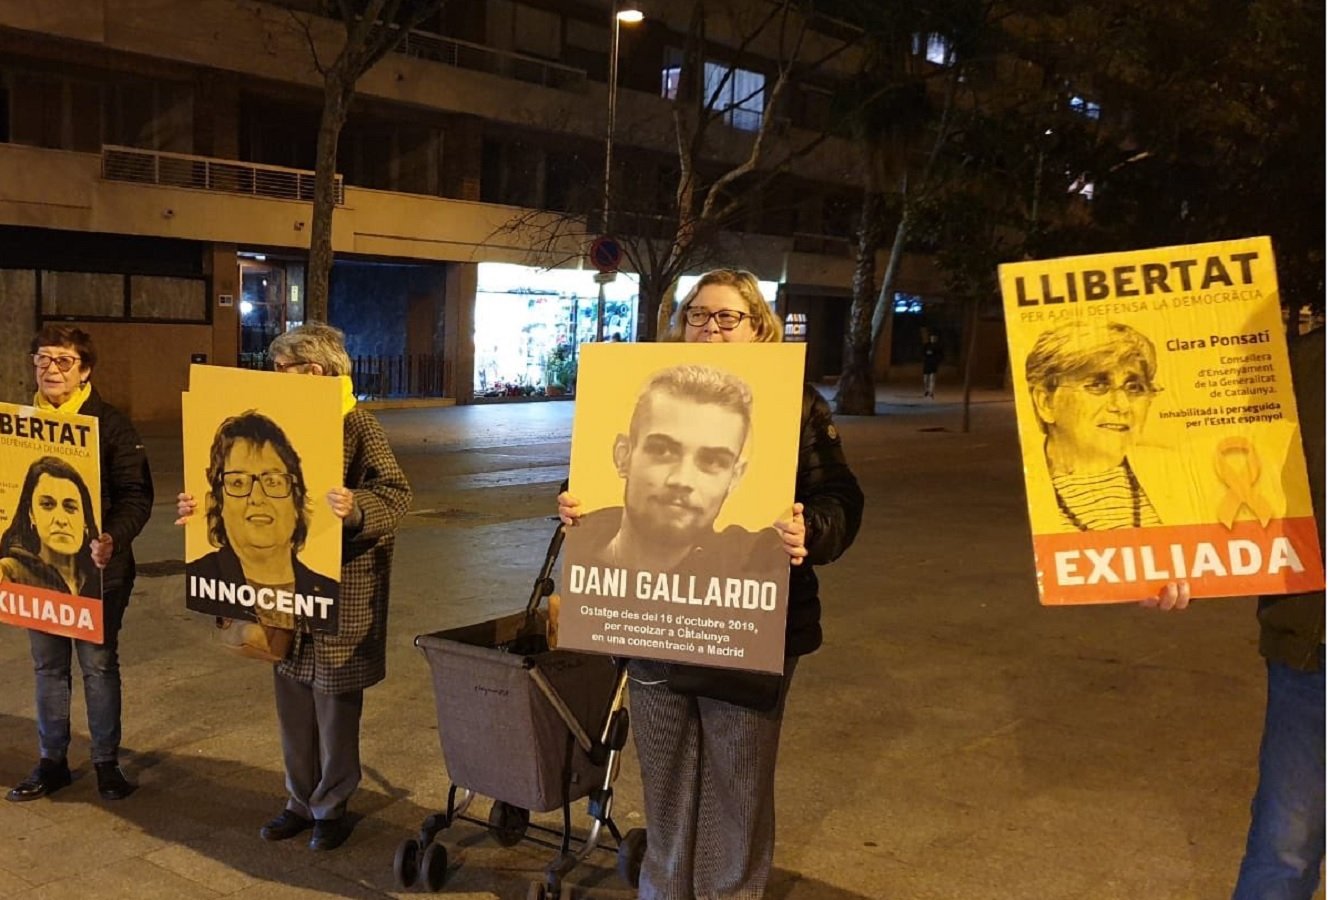 Dani Gallardo, jailed for 4 years over 2019 pro-independence protest in Madrid